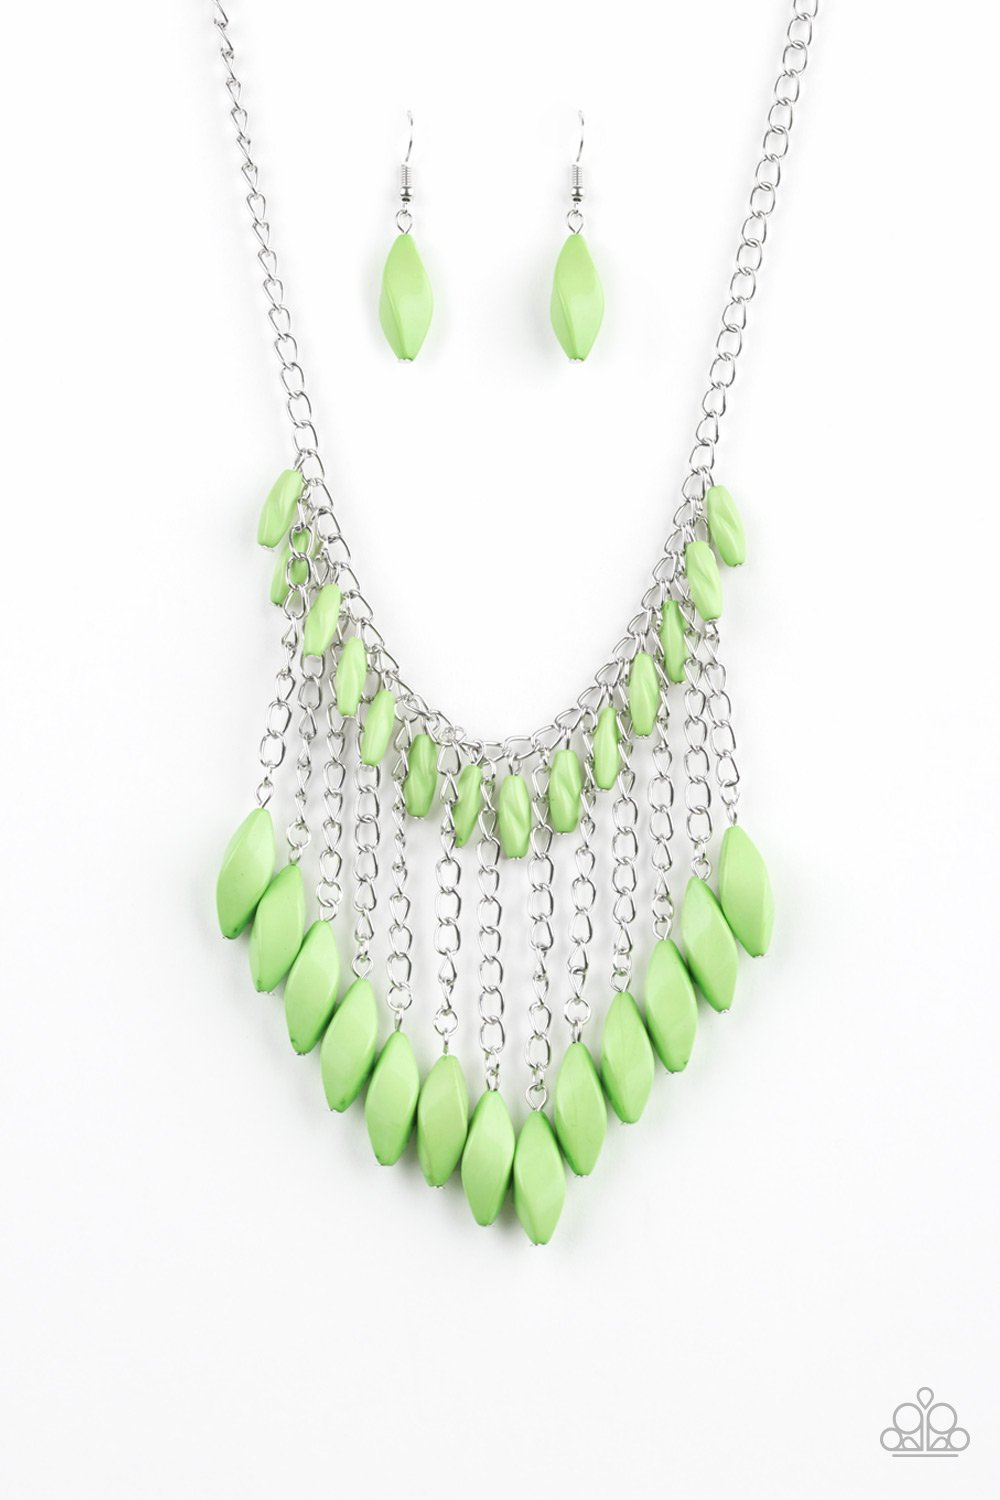 Venturous Vibes - Green and Silver Necklace - Paparazzi Accessories - A row of faceted green beads swing from the bottom of a shimmery silver chain below the collar. Larger green beads cascade from the bottoms of free-falling silver chains, creating a vivacious fringe fashion necklace. Trendy fashion jewelry for everyone.